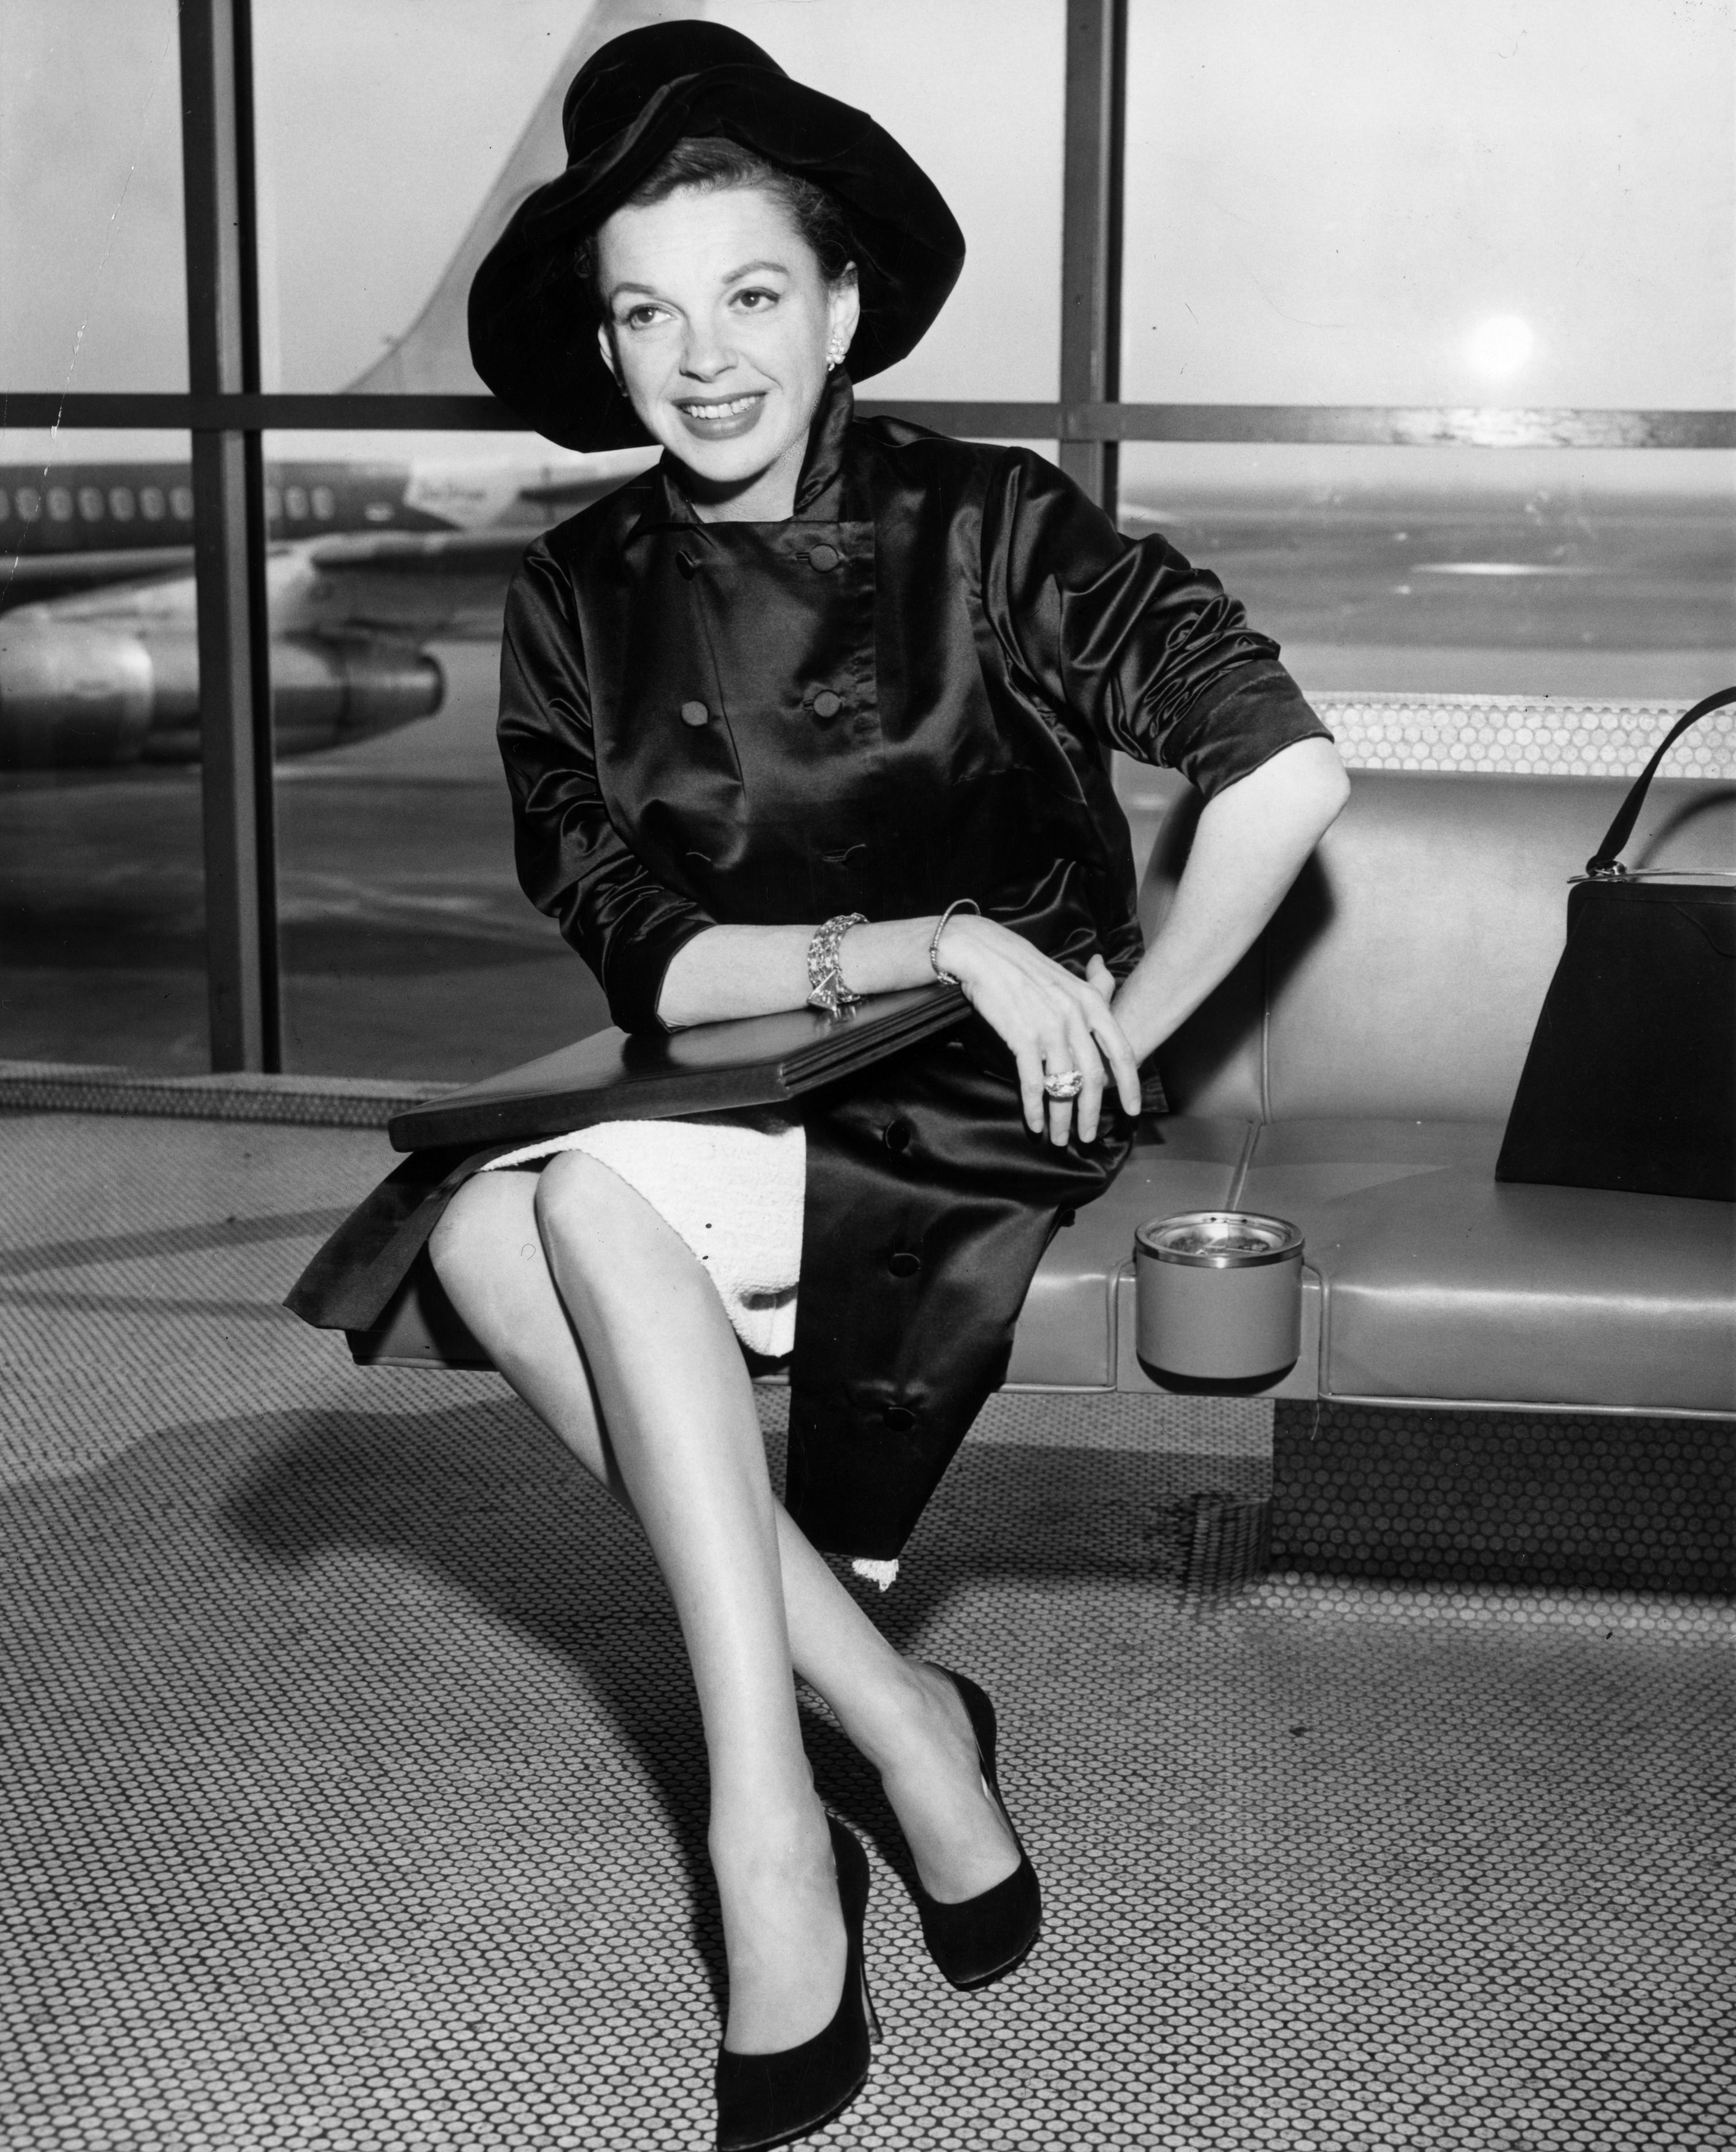 Judy Garland in an airport, circa 1955. | Source: Getty Images